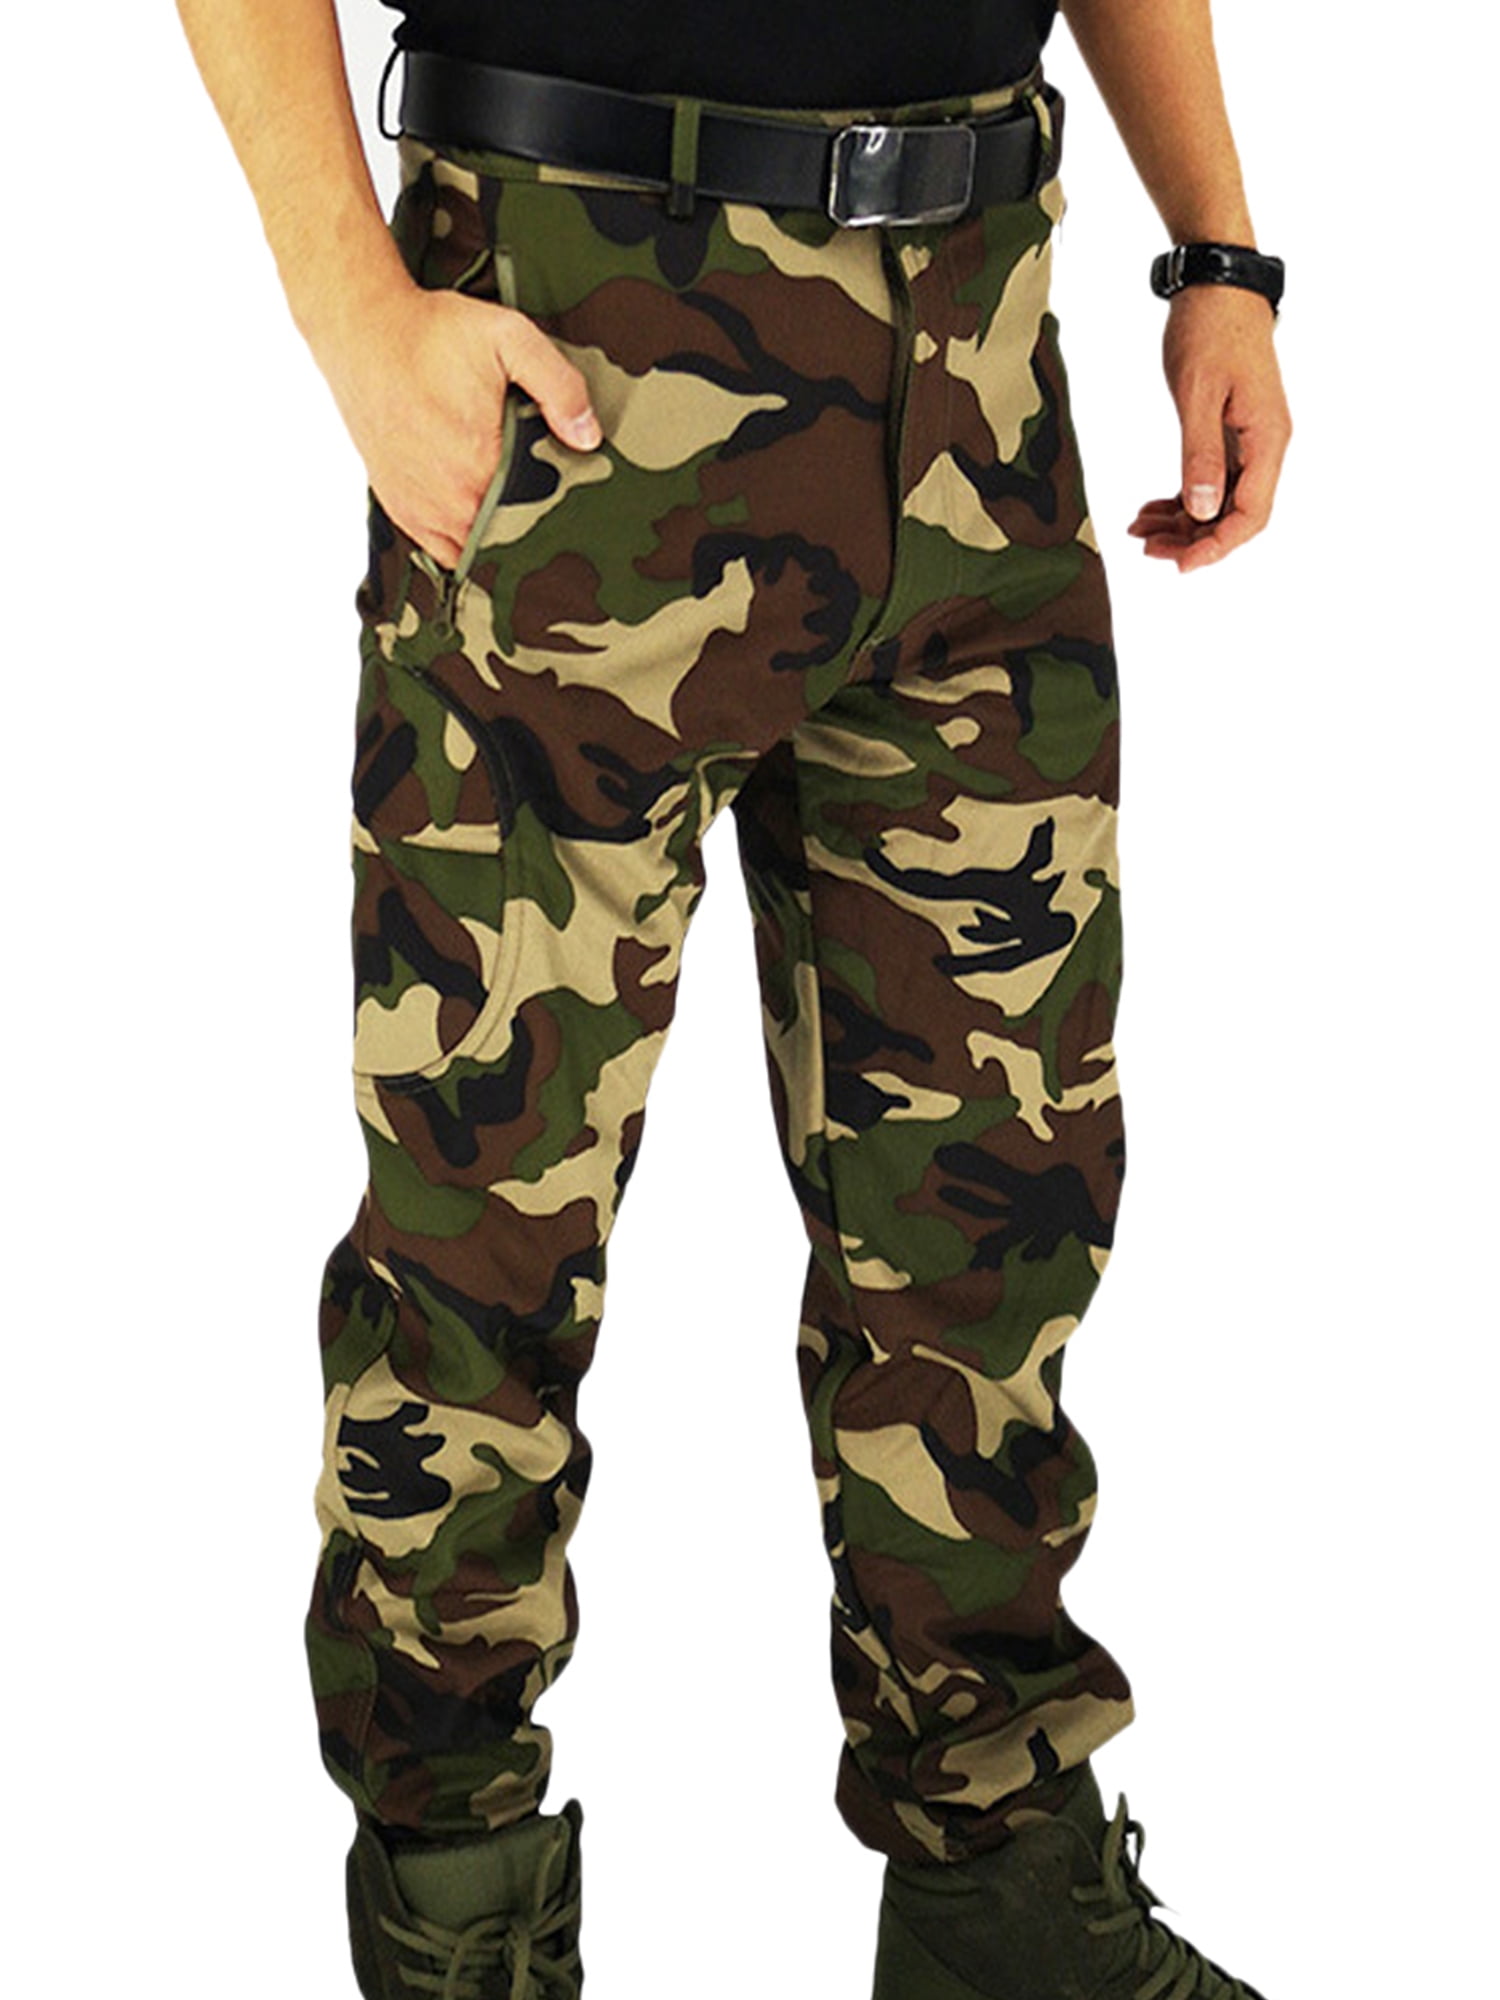 2 Army Cargo Camo Combat Military Mens Trousers Pants Camouflage Slacks Casual 